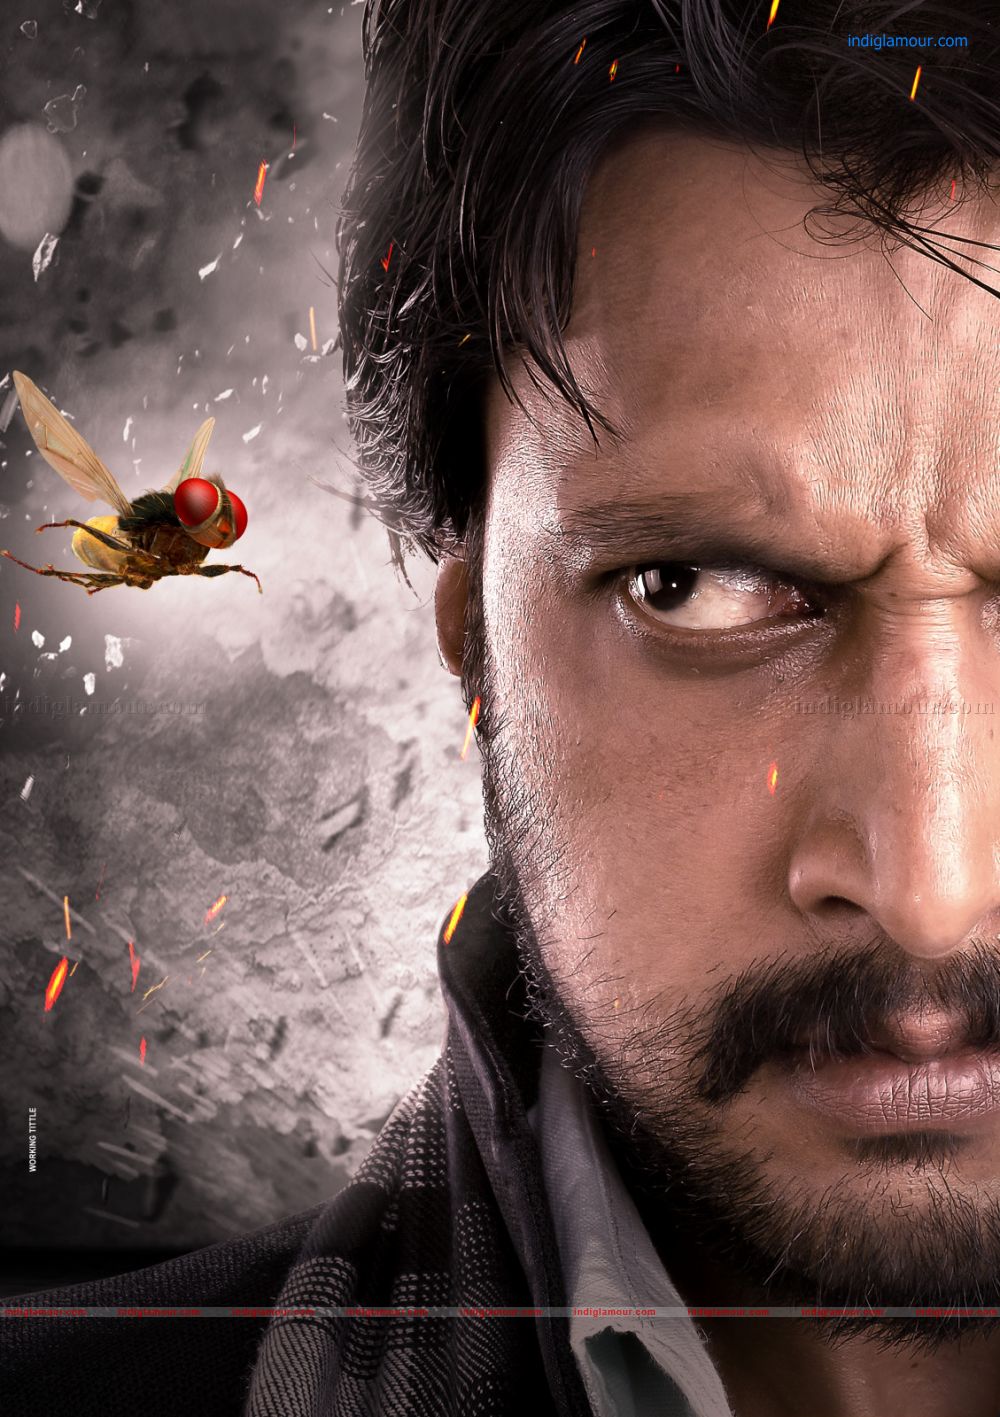 Eega Movie photos,images,pics,stills and picture - 5780 # 0 -  